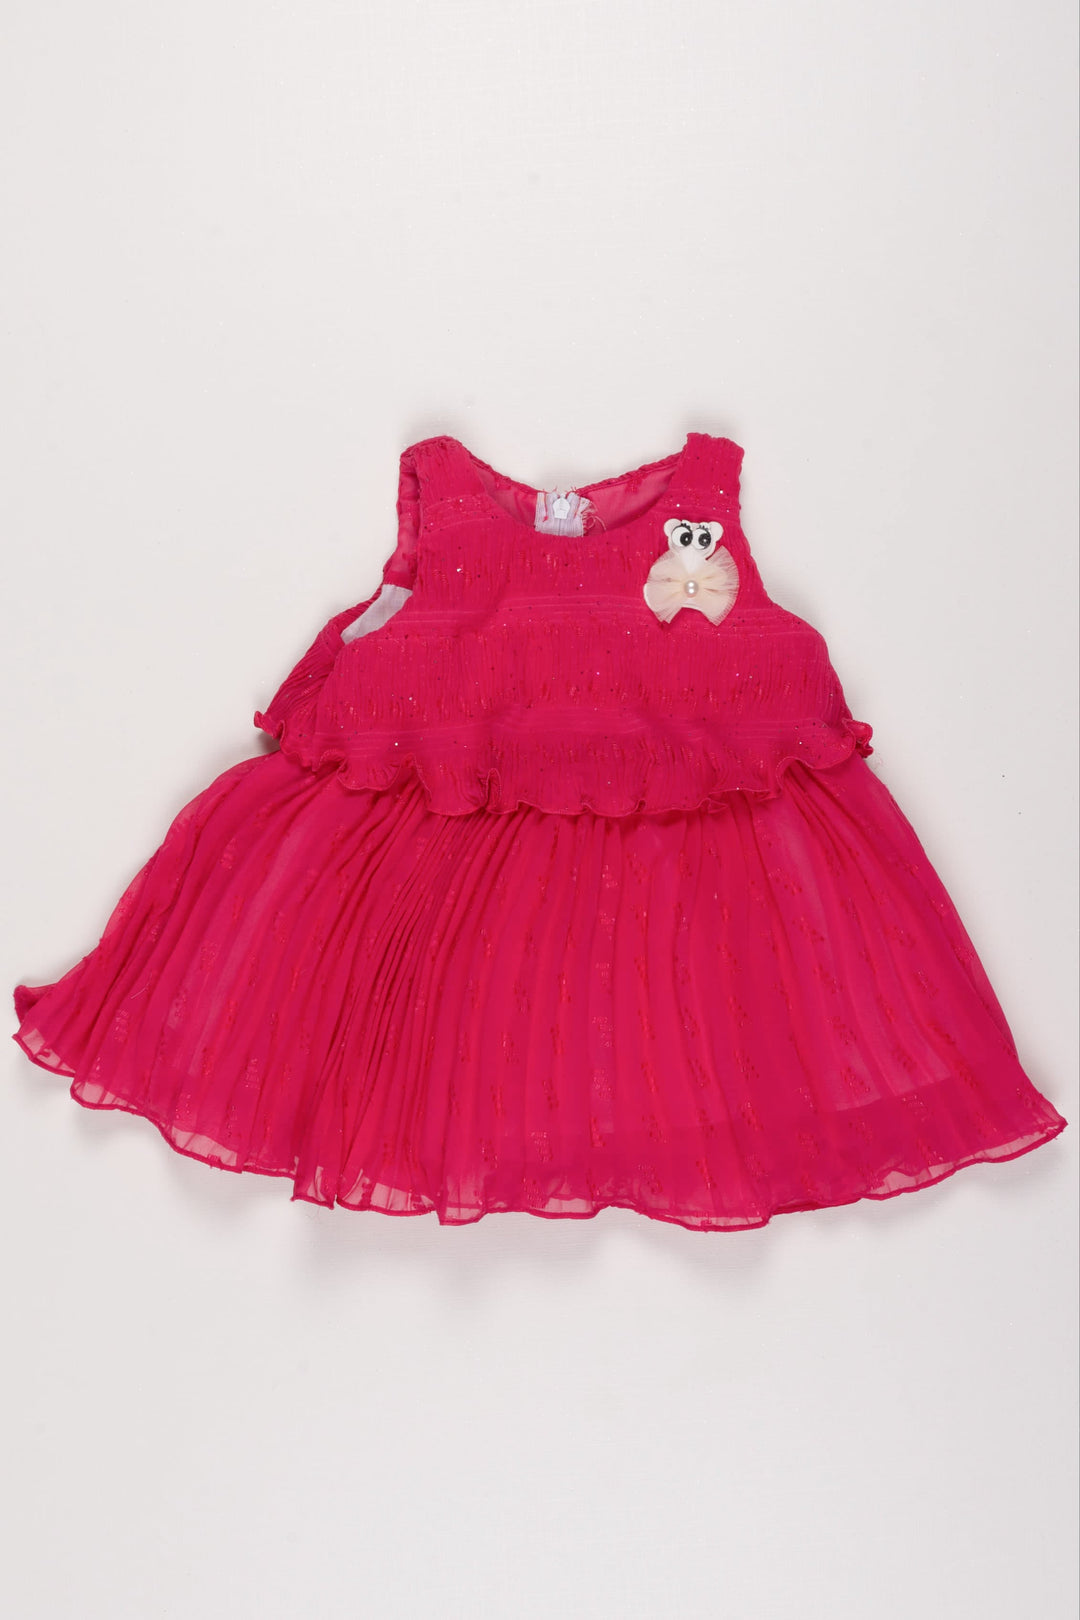 The Nesavu Baby Fancy Frock Baby Girl's Deep Pink Baby Frock with Sparkling Sequin Detail and Ruffled Hem Nesavu 12 (3M) / Pink BFJ499B-12 Glittery Pink Baby Frock | Birthday and Formal Wear | The Nesavu